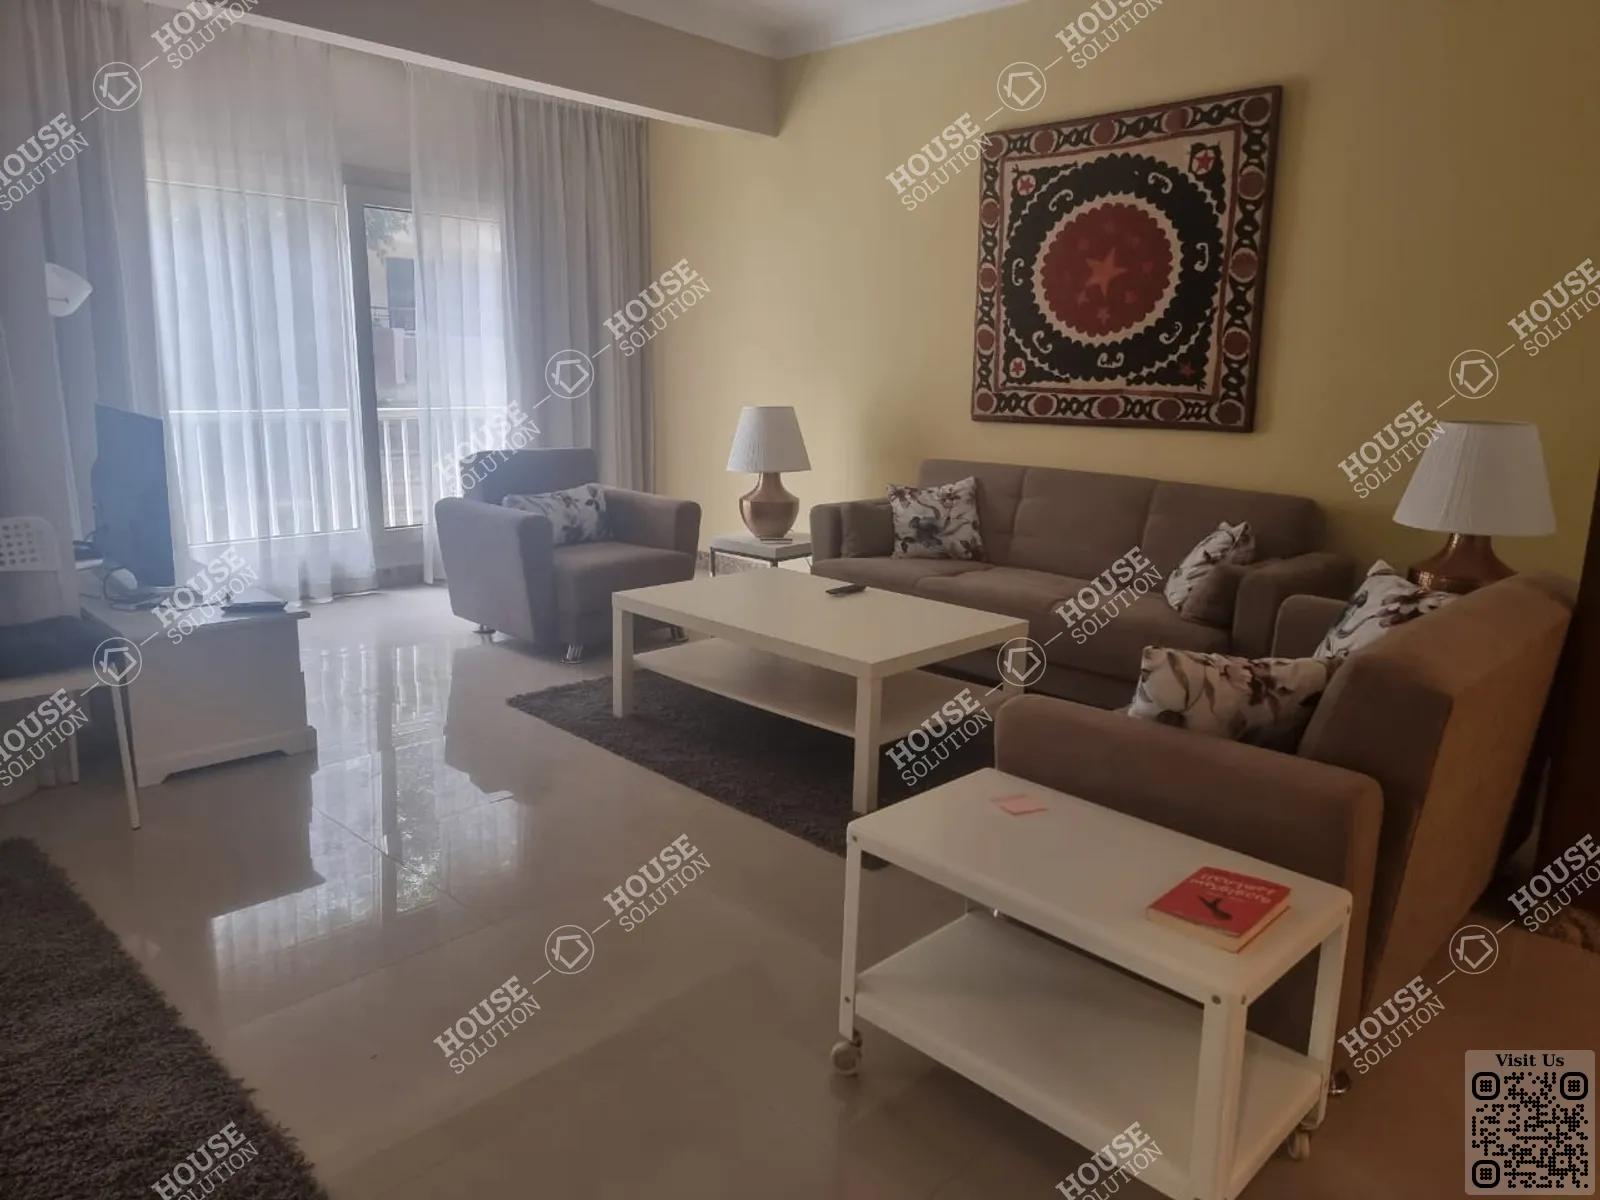 RECEPTION  @ Apartments For Rent In Maadi Maadi Sarayat Area: 130 m² consists of 2 Bedrooms 2 Bathrooms Modern furnished 5 stars #5662-0